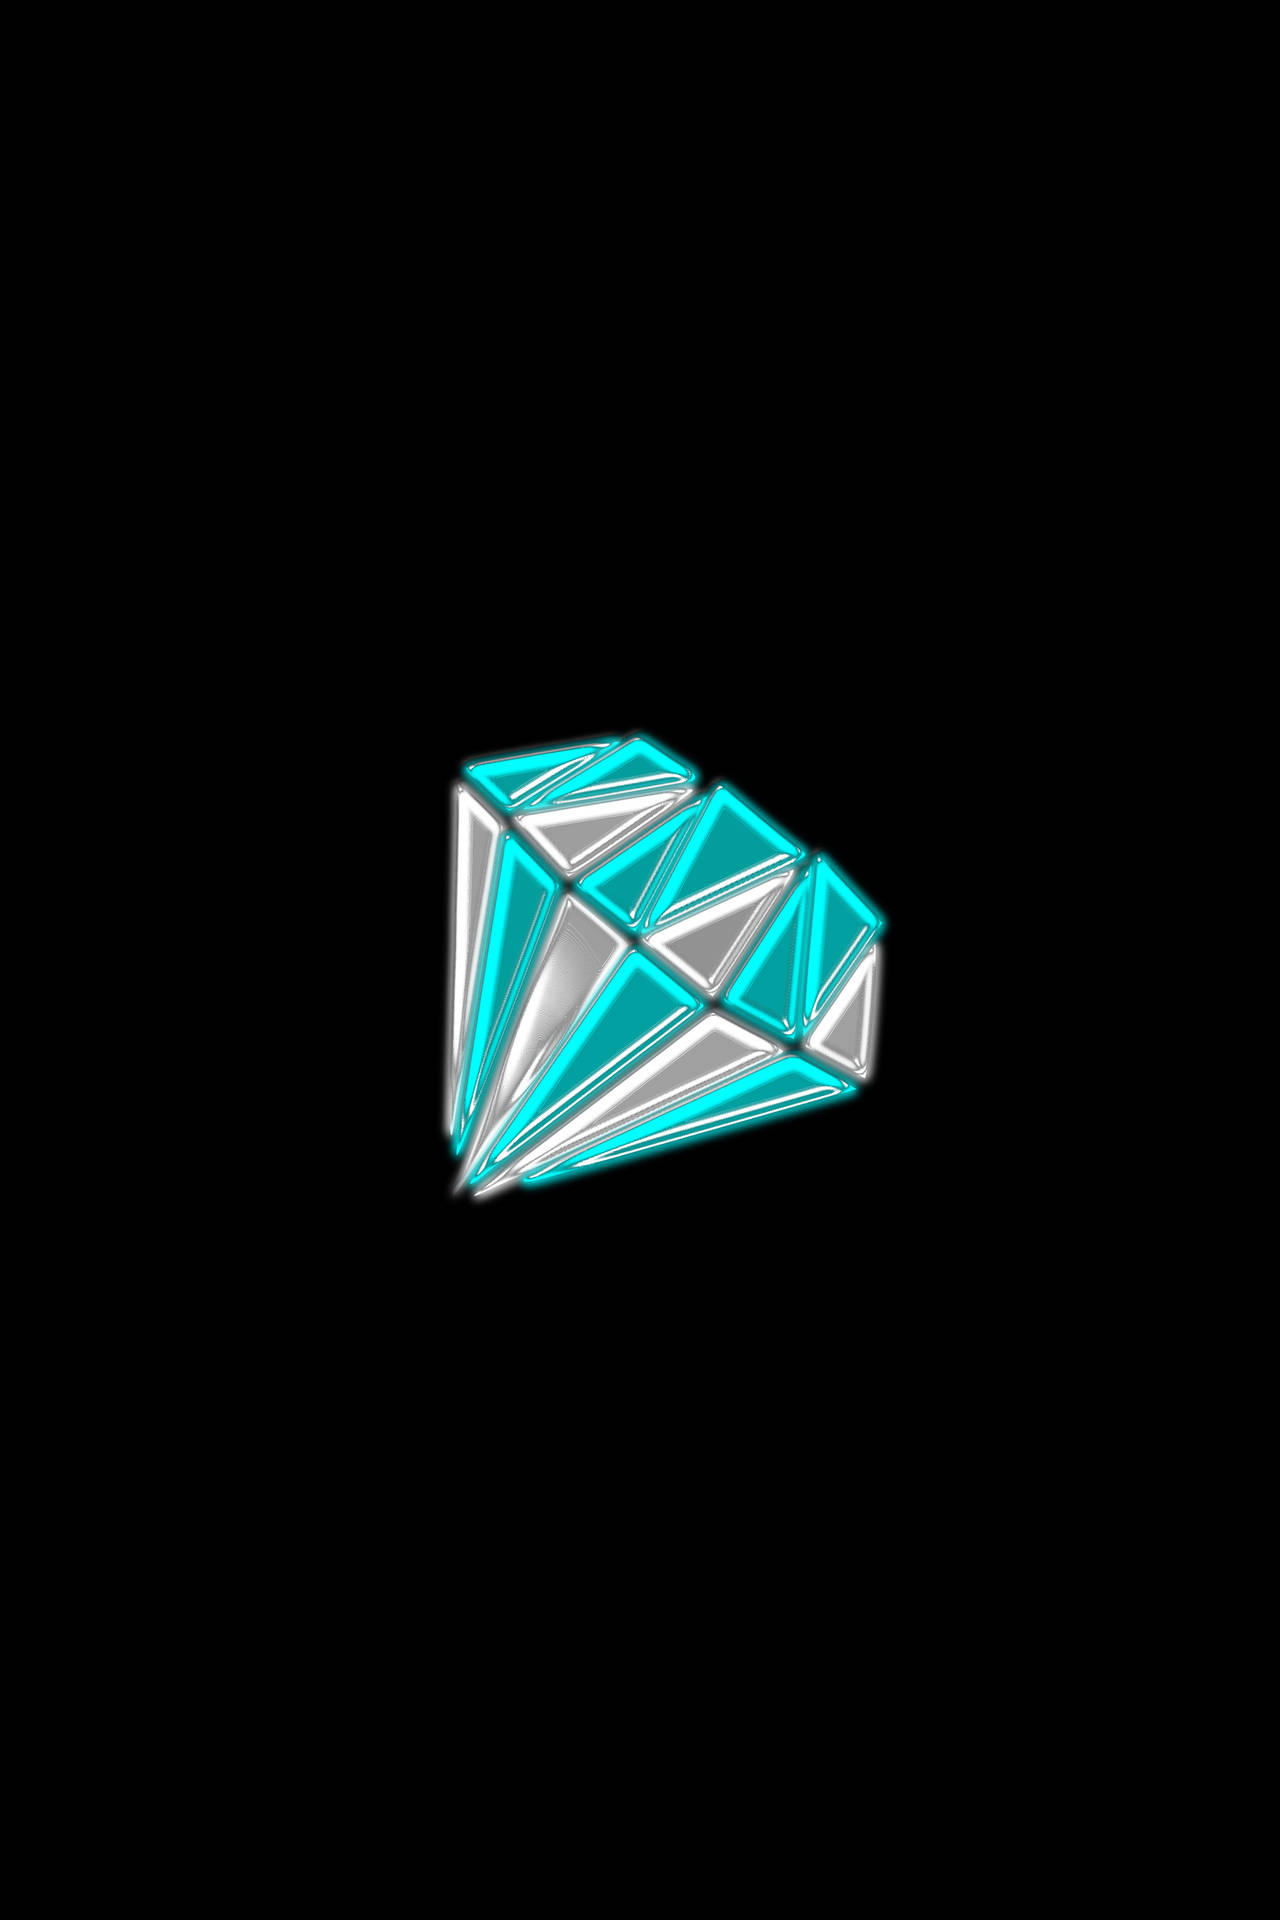 Diamond 4000X6000 Wallpaper and Background Image